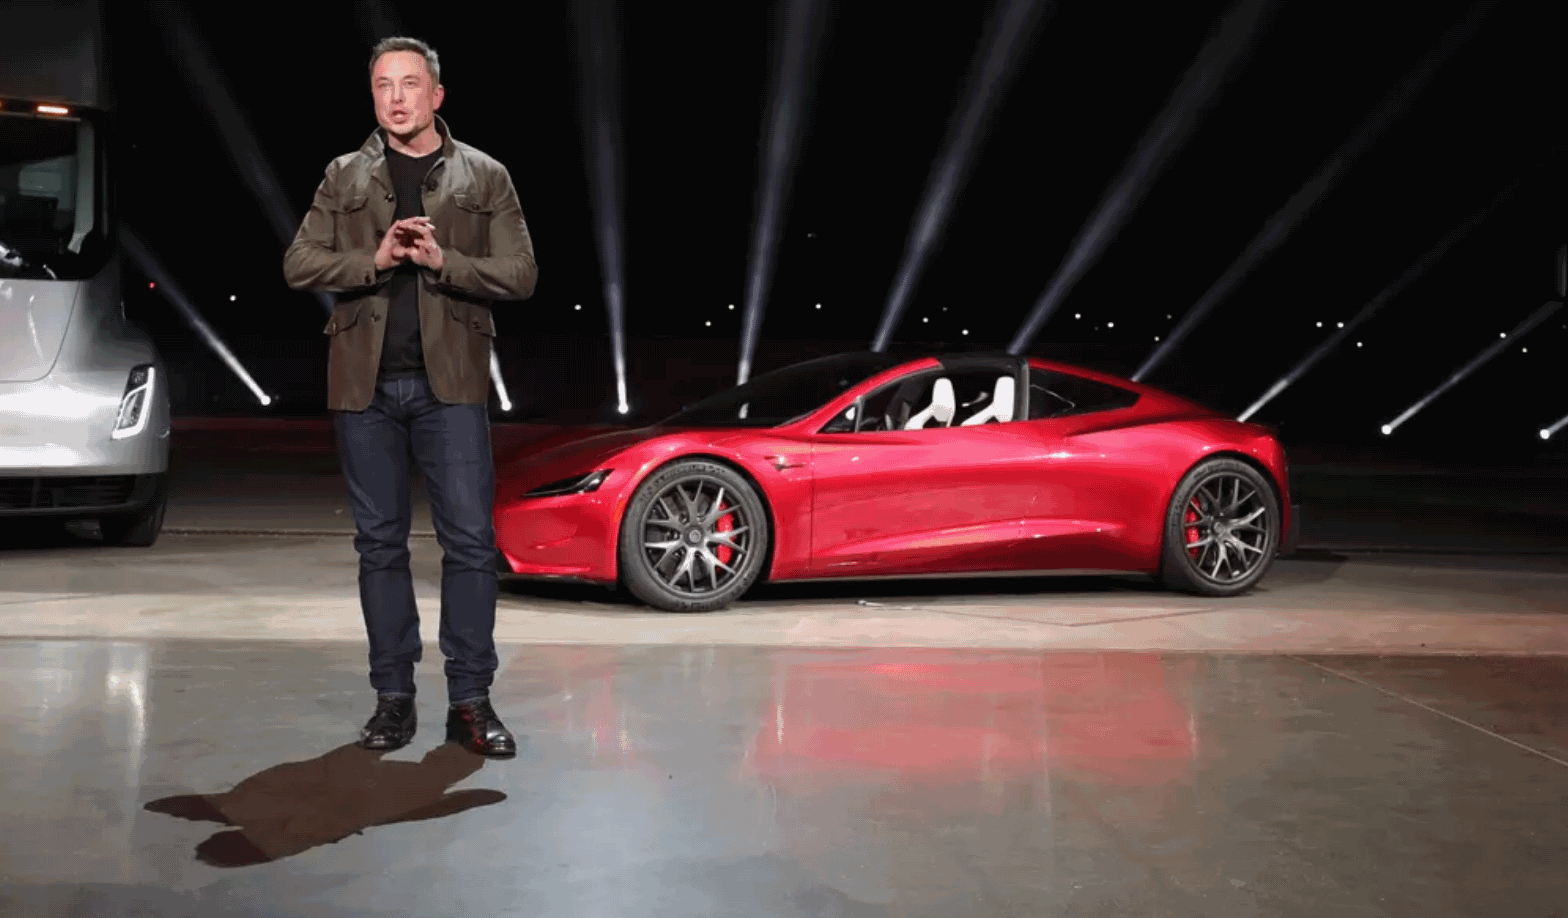 Tesla is ‘Very Close’ to Developing Fully Autonomous Vehicles